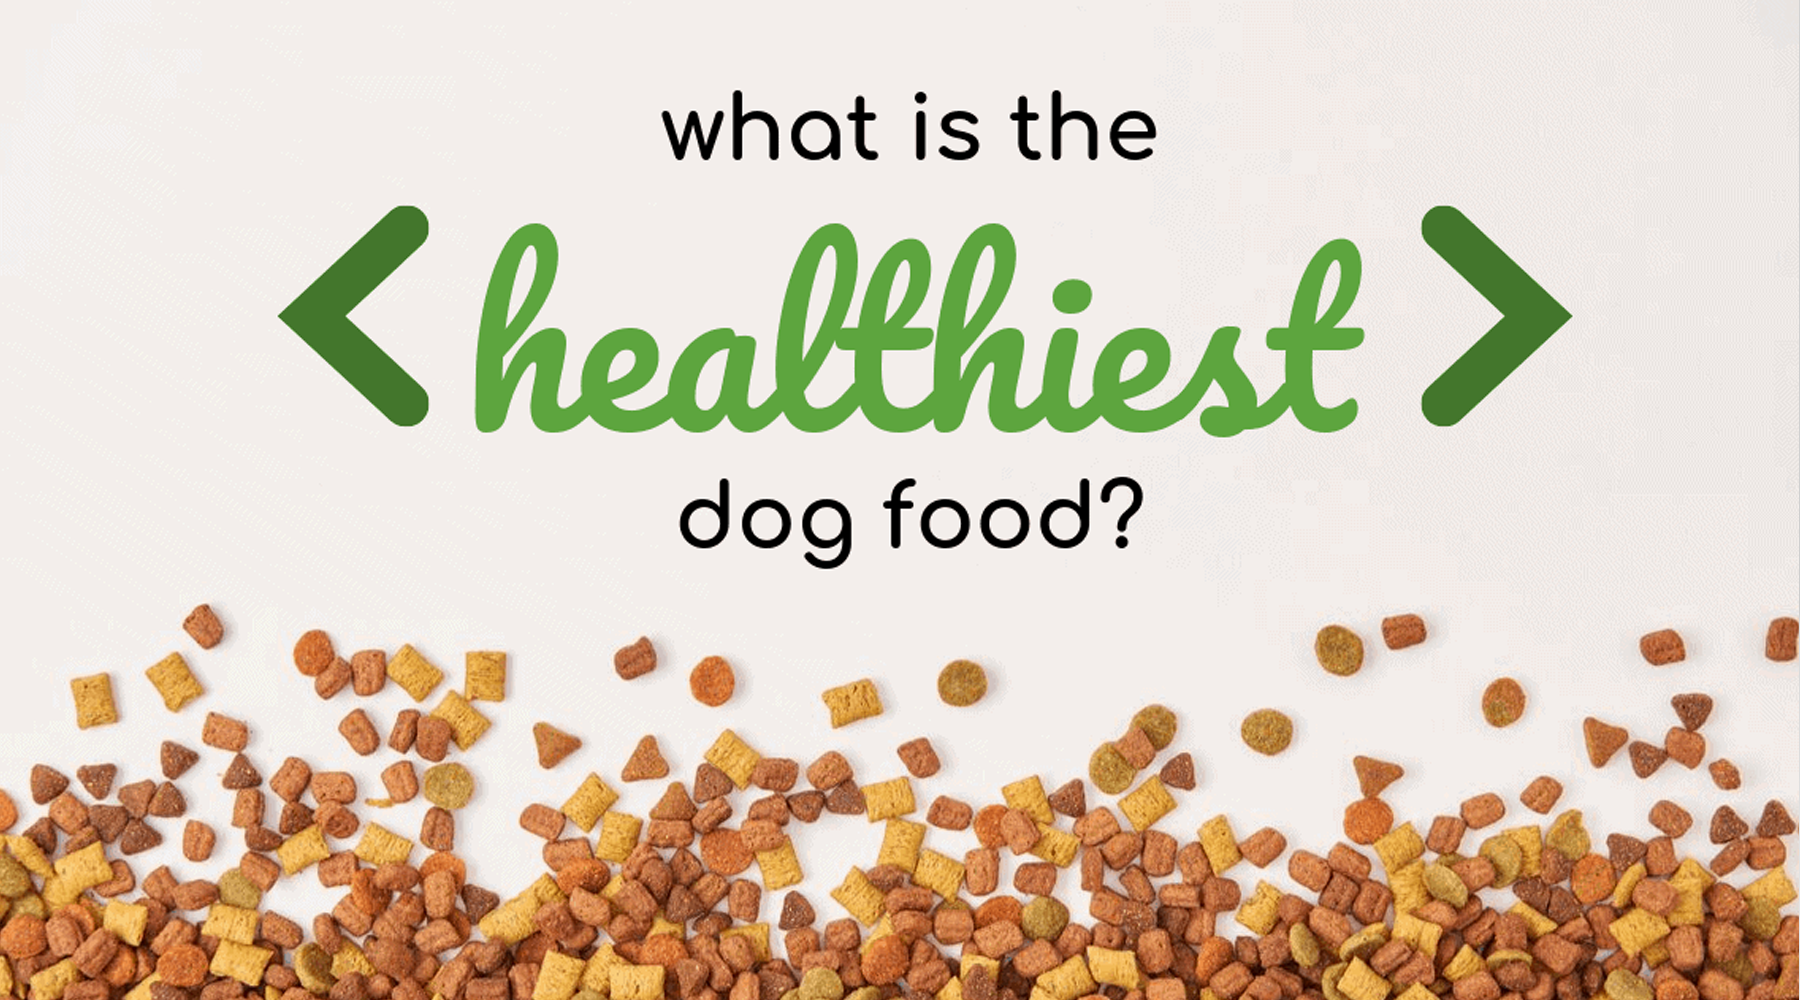 Trusting the Pet Food Industry